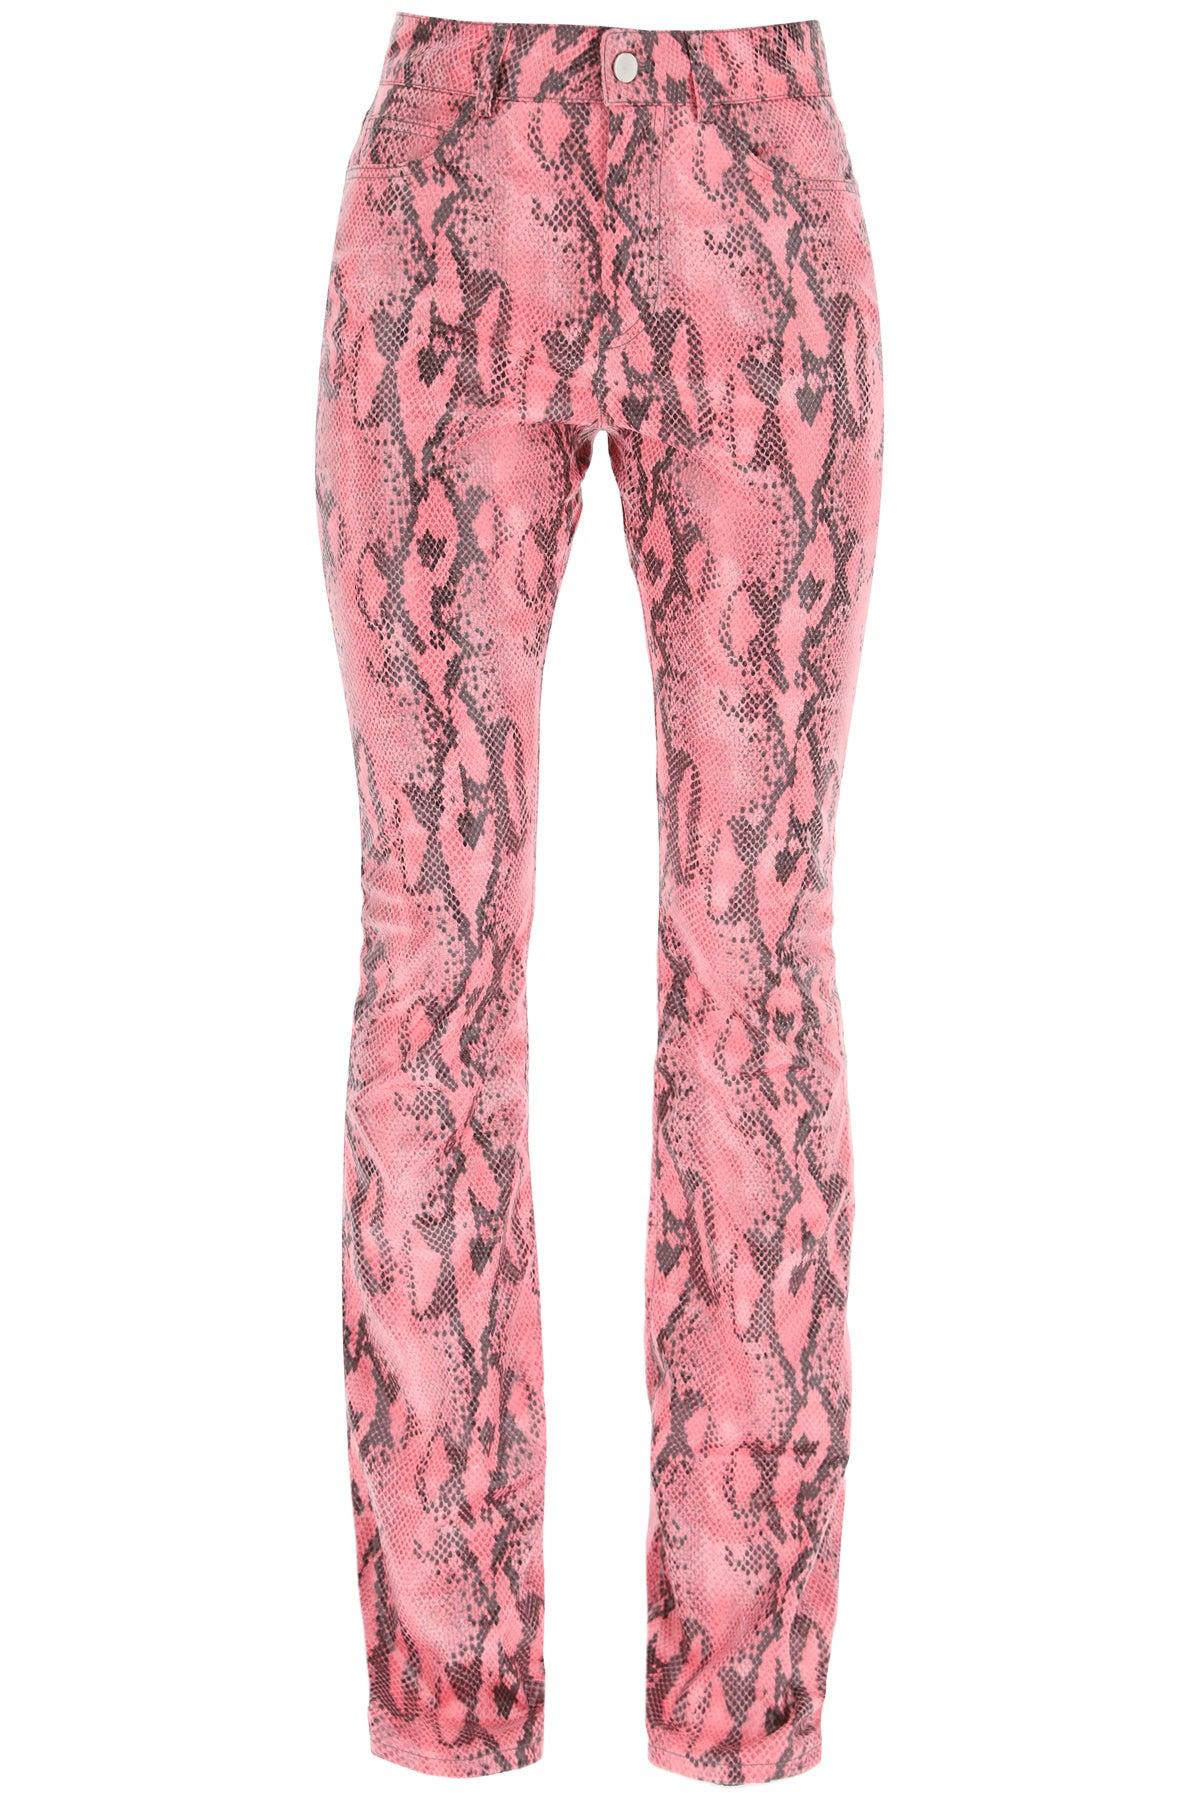 Alessandra Rich Python Flare Trousers in Pink - Lyst